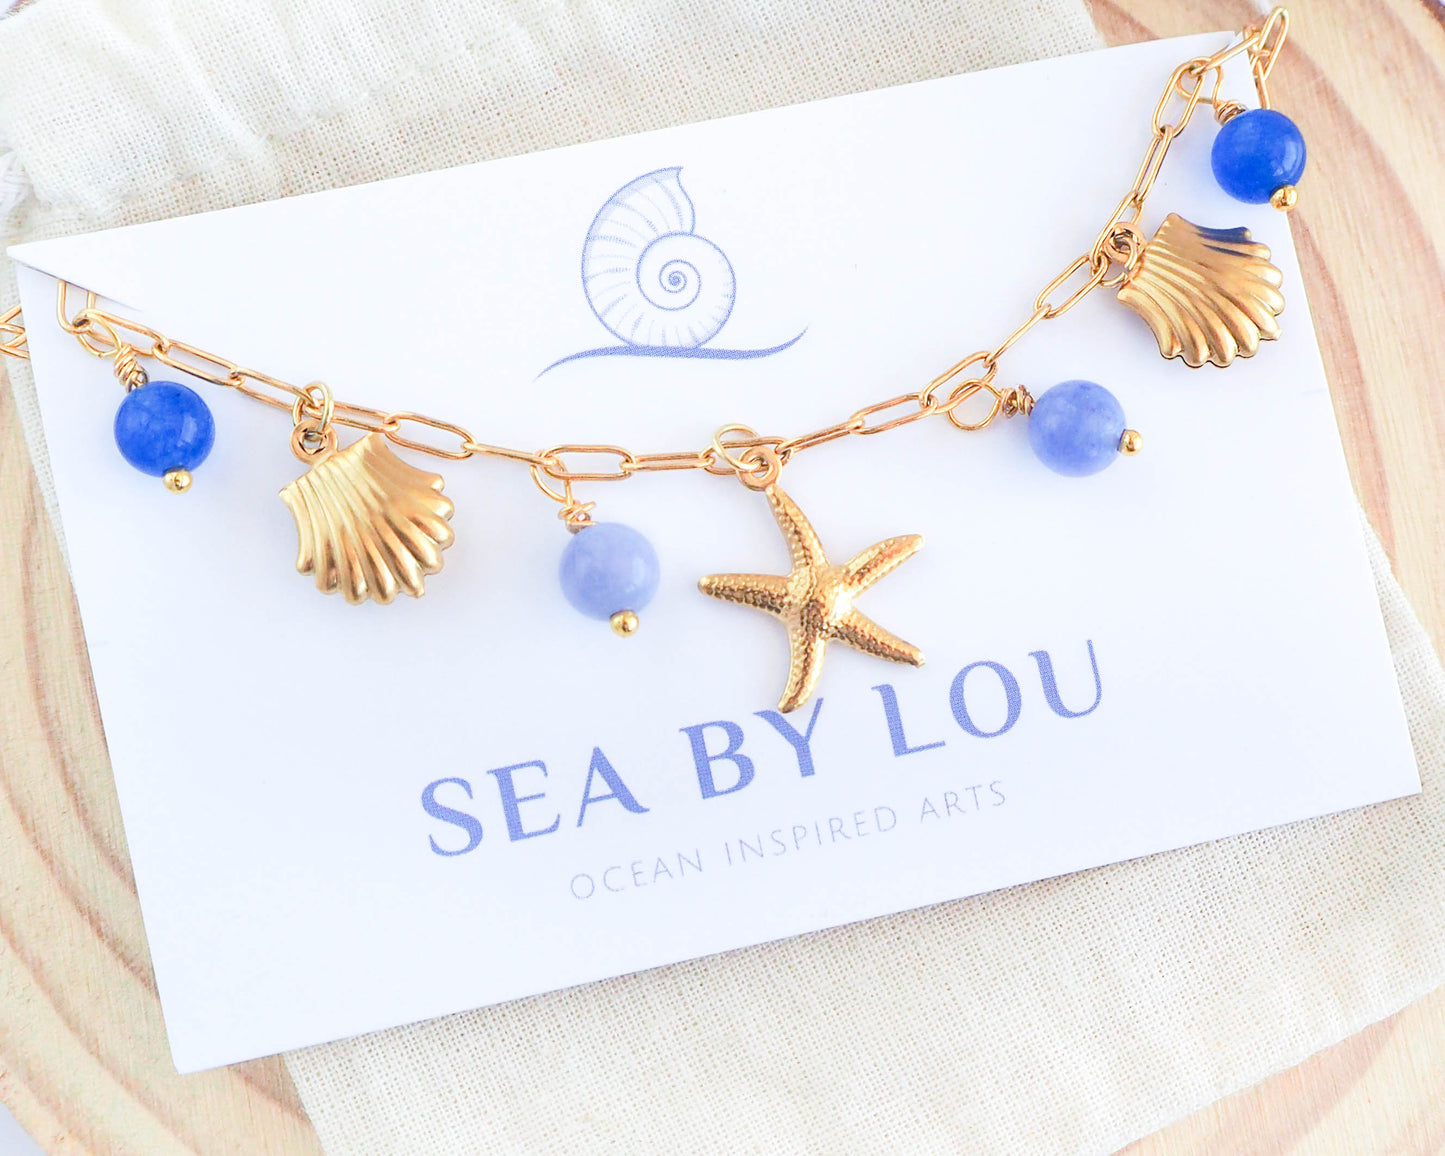 Gold Sea Star and Shells Charm Ankle Bracelet with Gemstones, Stainless Steel Bracelet, Coastal Summer Jewelry, Beach Girl Gift, Gold Sea Star and Shells Ankle bracelet with aquamarine, Sea by lou